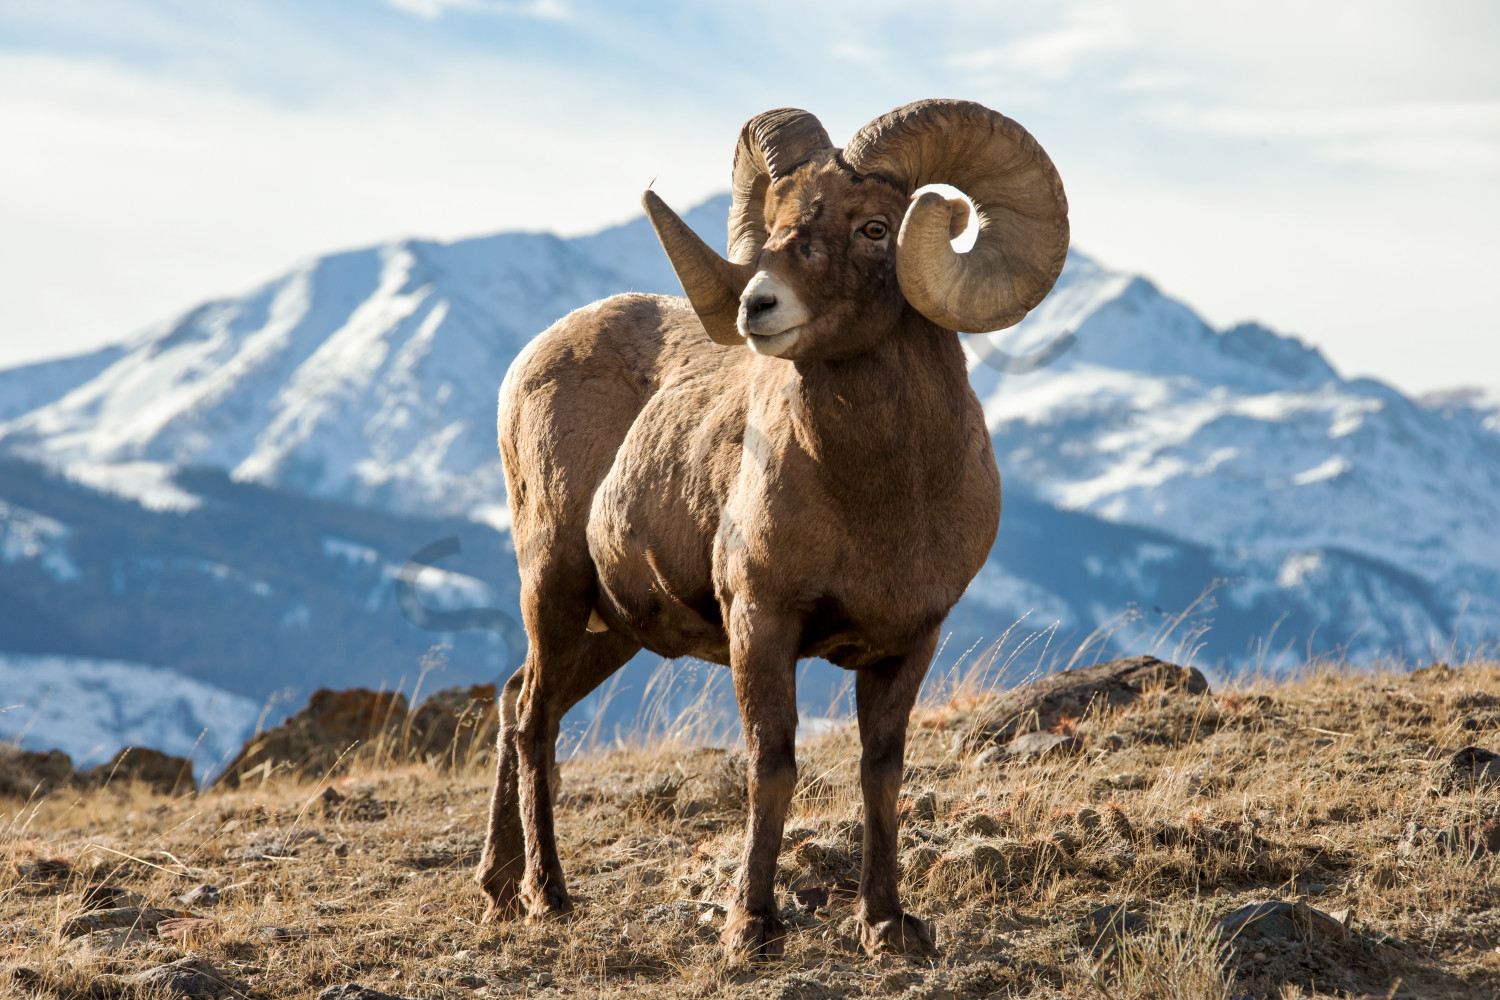 Rocky Mountain Bighorn Sheep in Wyoming 'See The World' Photo by